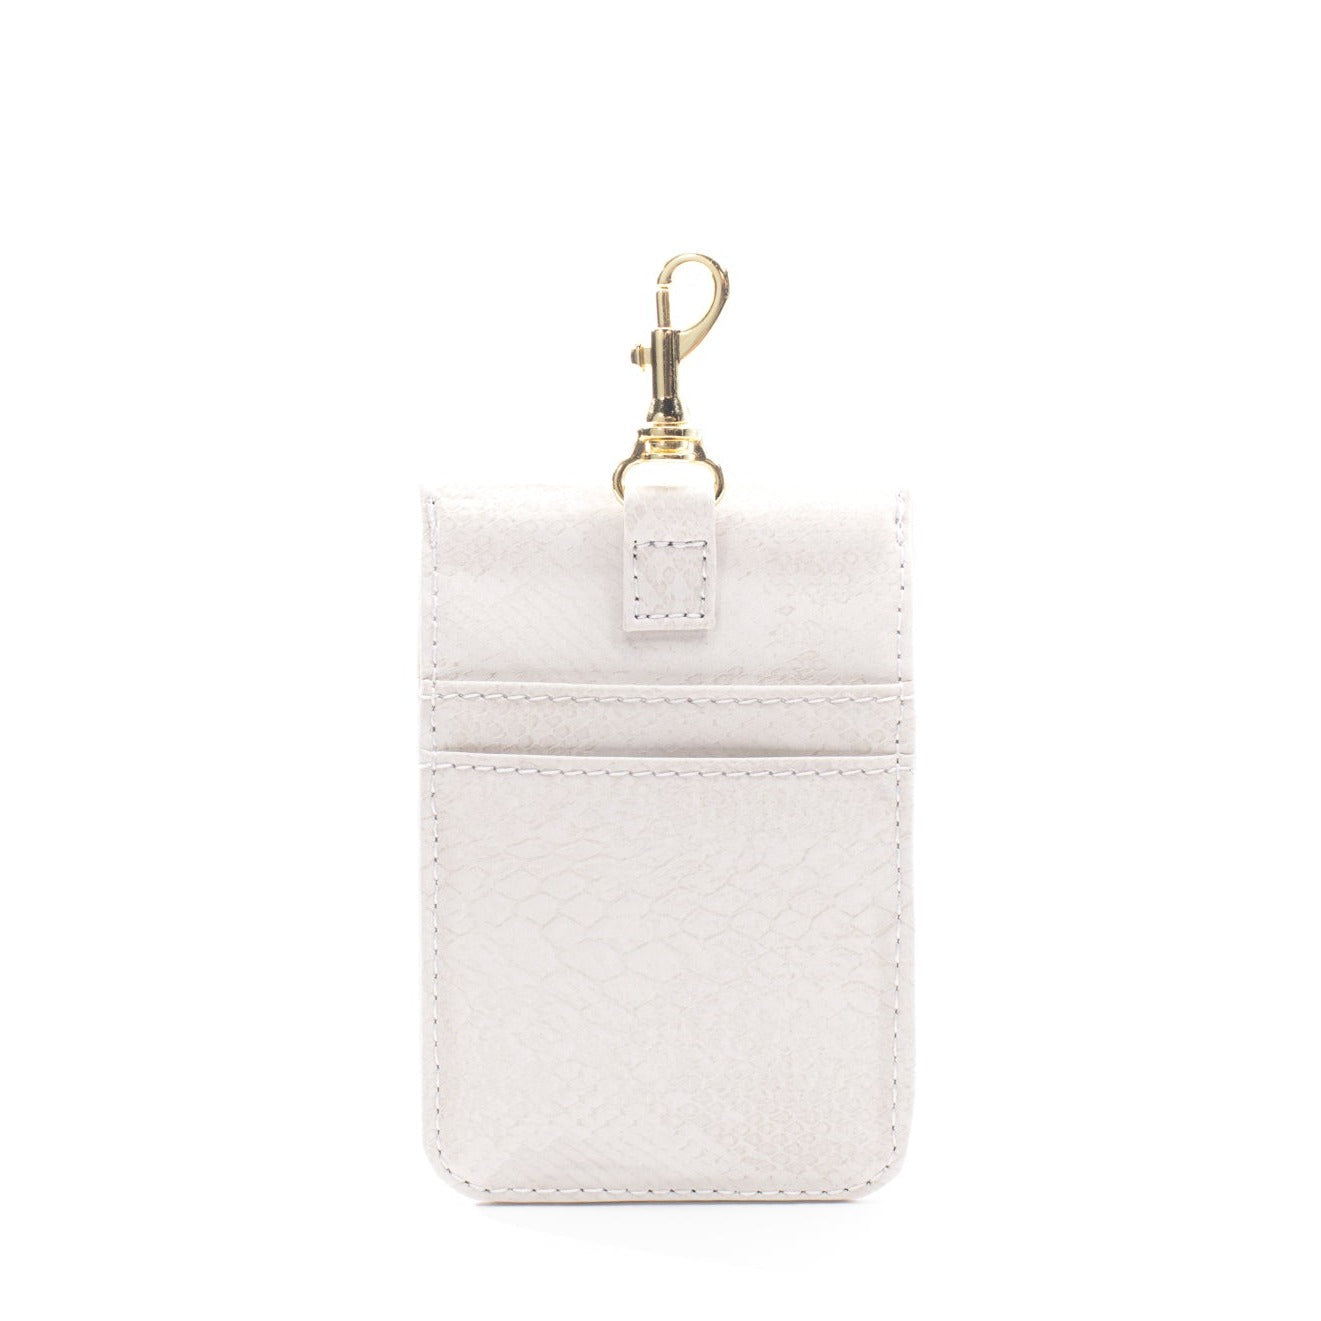 Card Case Wallet - Ivory (white) Faux Snake - Gold Toned Hardware